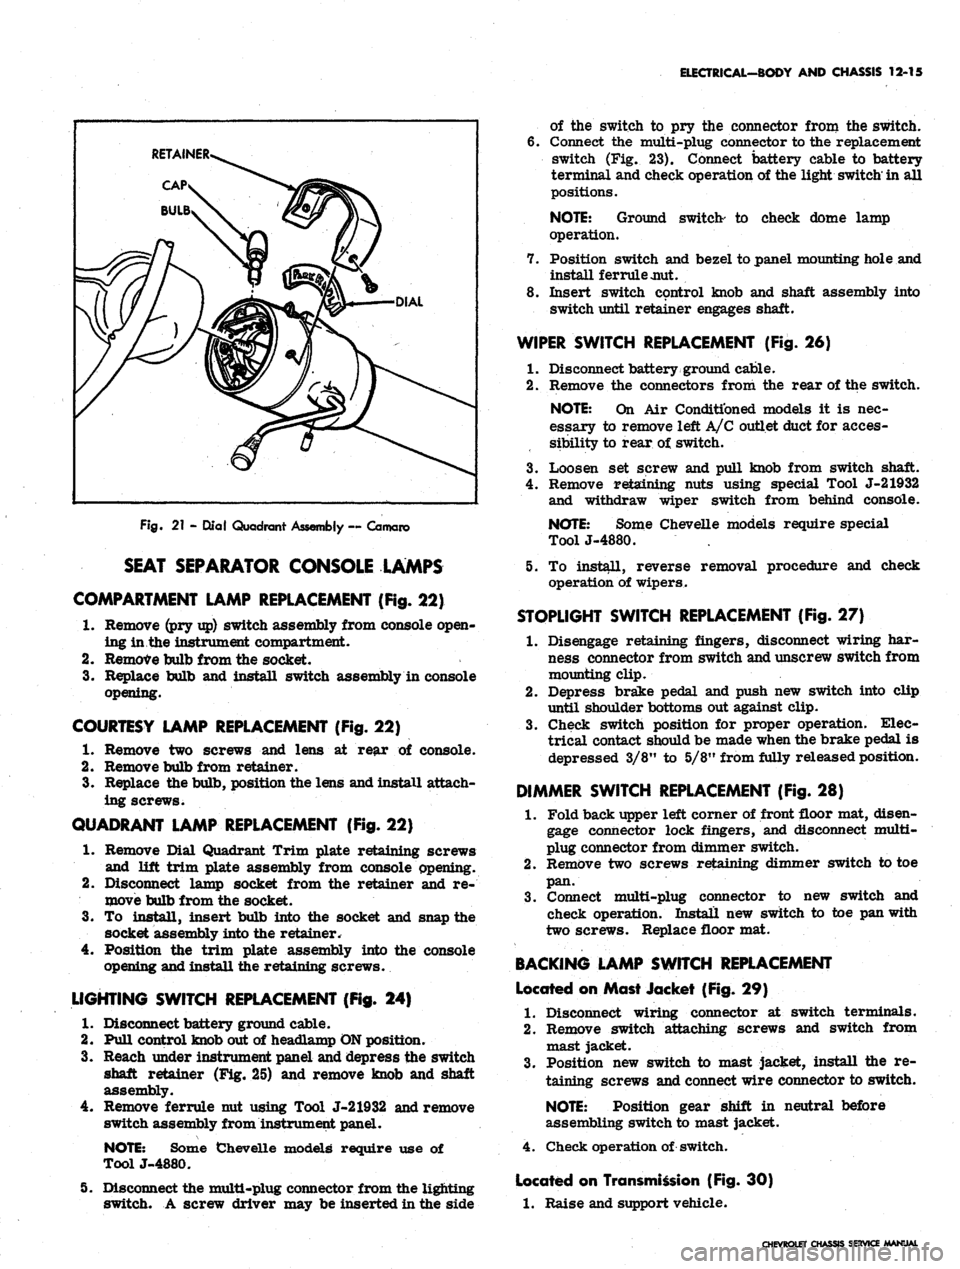 CHEVROLET CAMARO 1967 1.G Chassis Workshop Manual 
ELECTRICAL-BODY AND CHASSIS 12-15

Fig.
 21 - Qlal Quadrant Assembly ~ Camaro

SEAT SEPARATOR CONSOLE LAMPS

COMPARTMENT LAMP REPLACEMENT (Fig.
 22)

1.
 Remove (pry up) switch assembly from console 